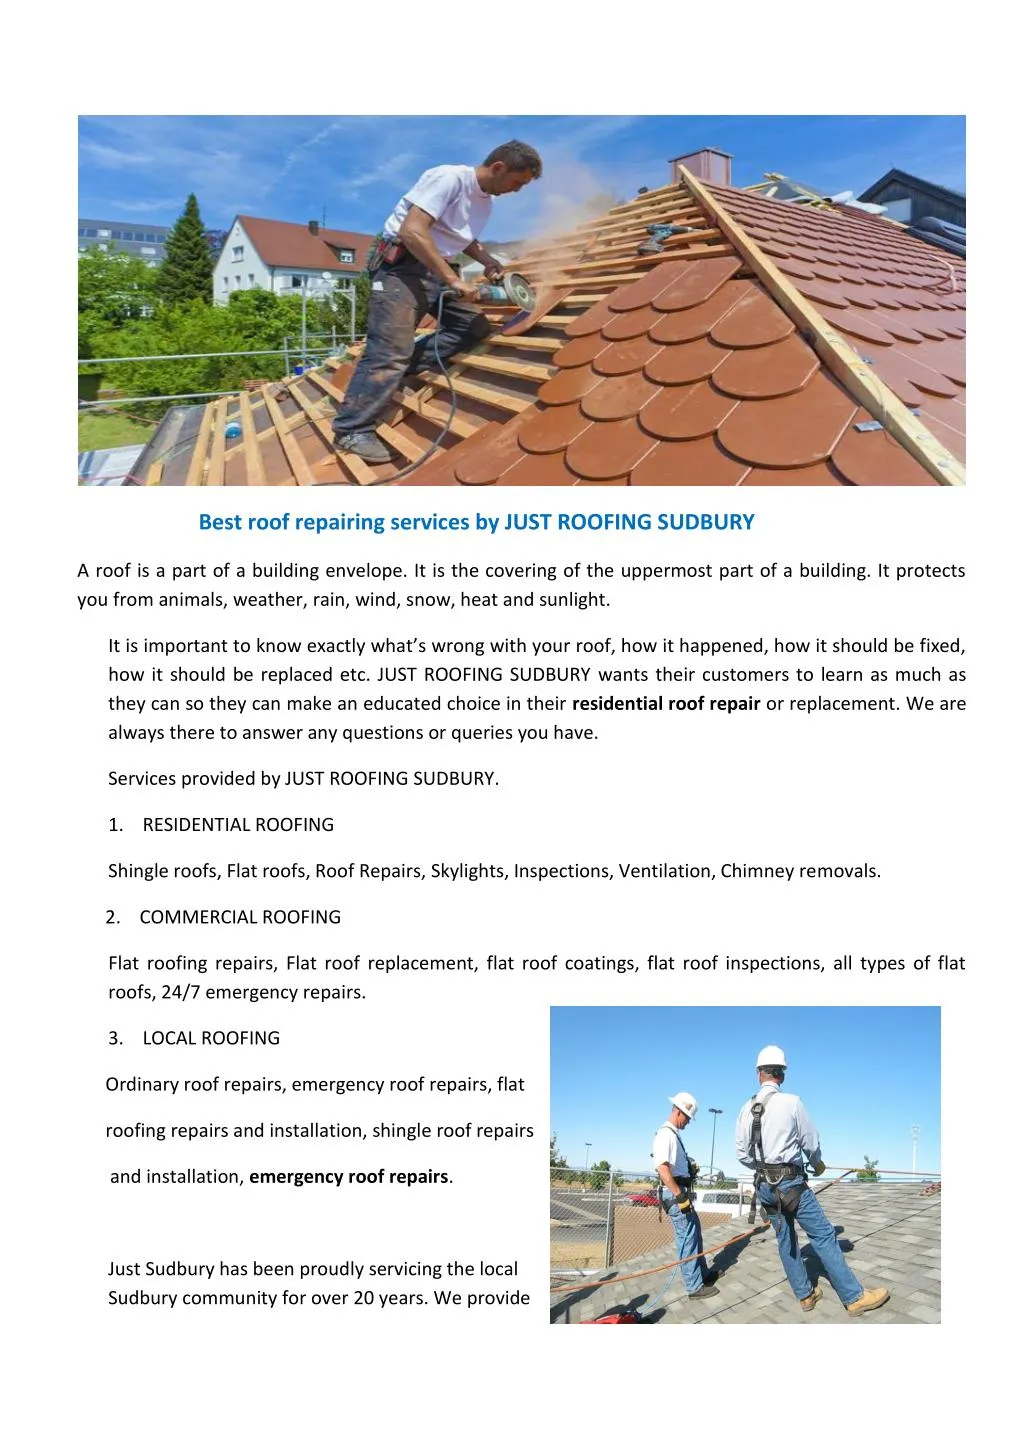 best roof repairing services by just roofing n.